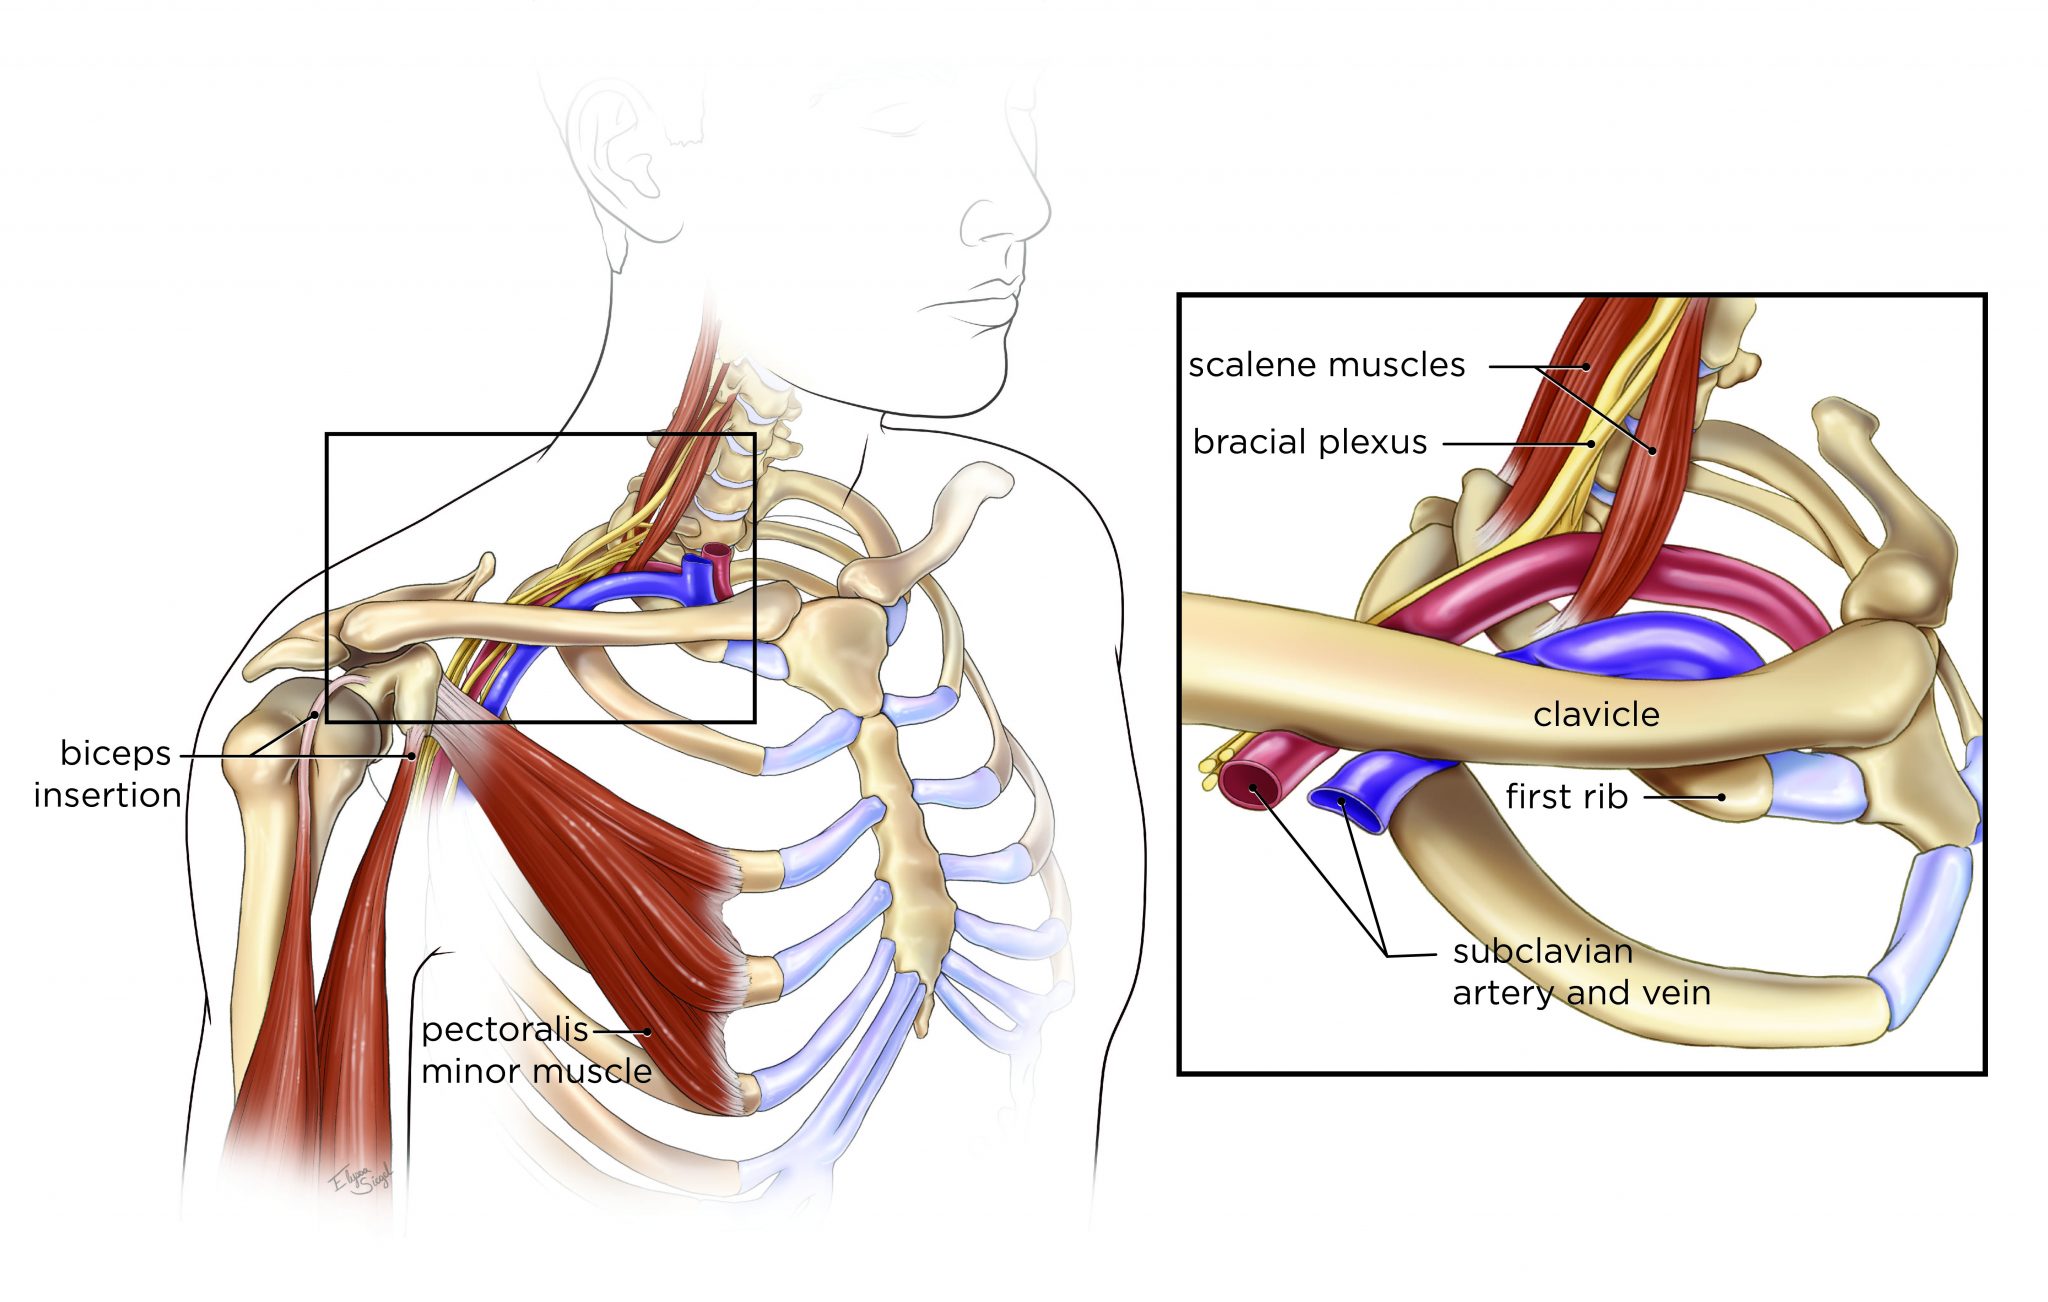 allen test for thoracic outlet syndrome